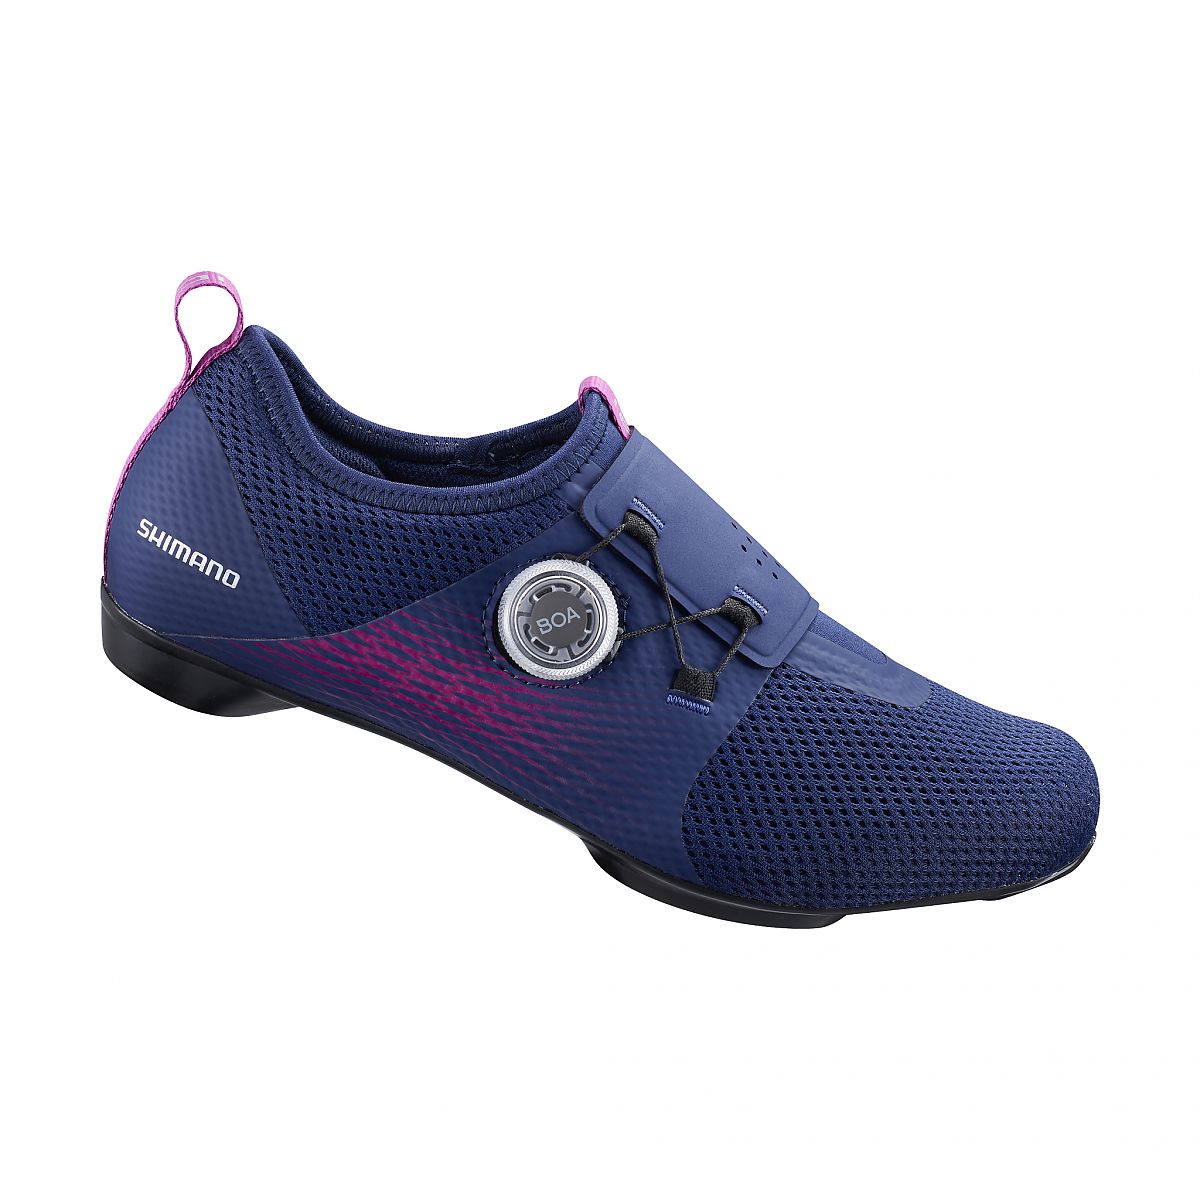 women's indoor cycling shoes with cleats